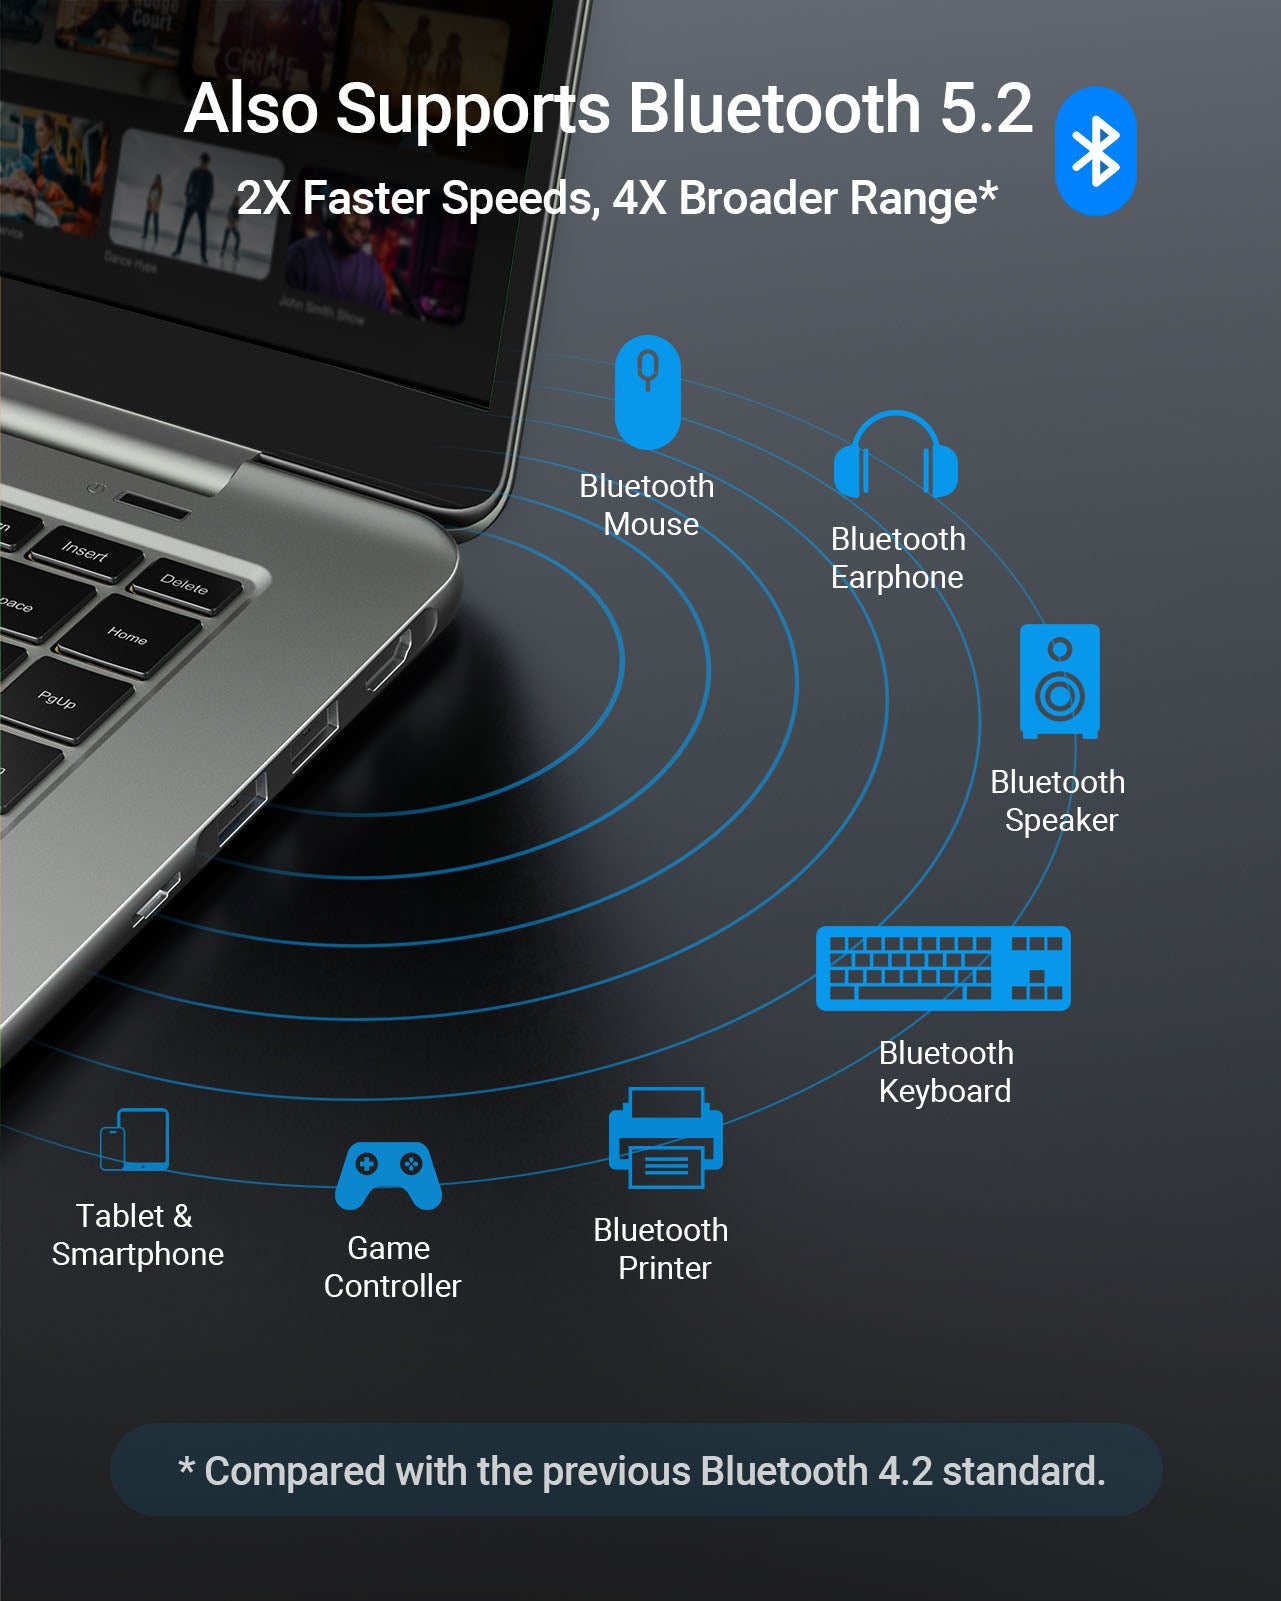 M.2 WiFi Card Also Supports Bluetooth 5.2 Works with Bluetooth Devices such as Mouse Earphone Speaker Keyboard Printer Delivers 2X Faster Speeds and 4X Broader Range Compared to Bluetooth 4.2